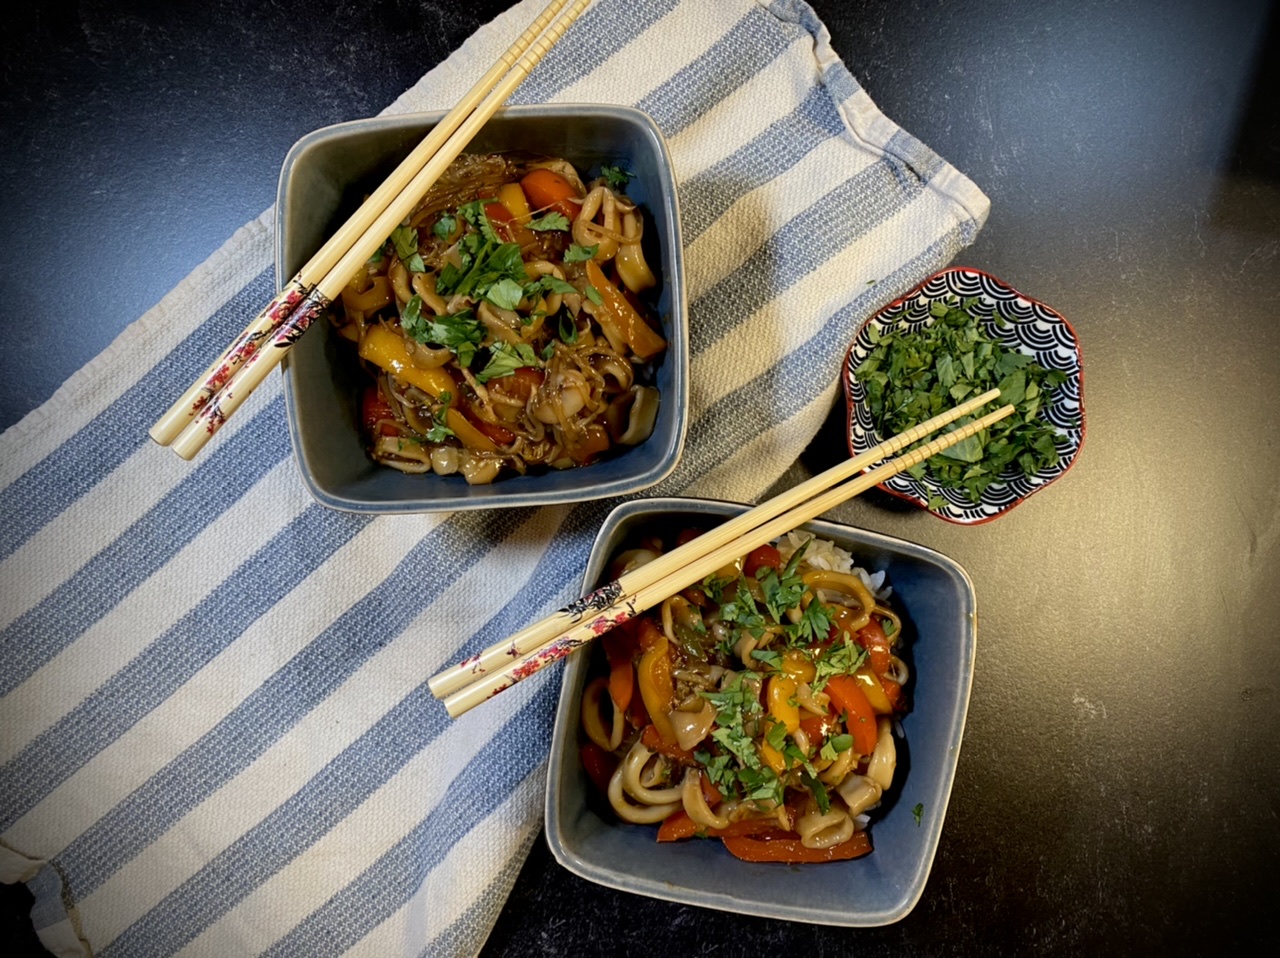 Squid stir fry in two blue bowls with chopsticks on top of a blue and white striped towel